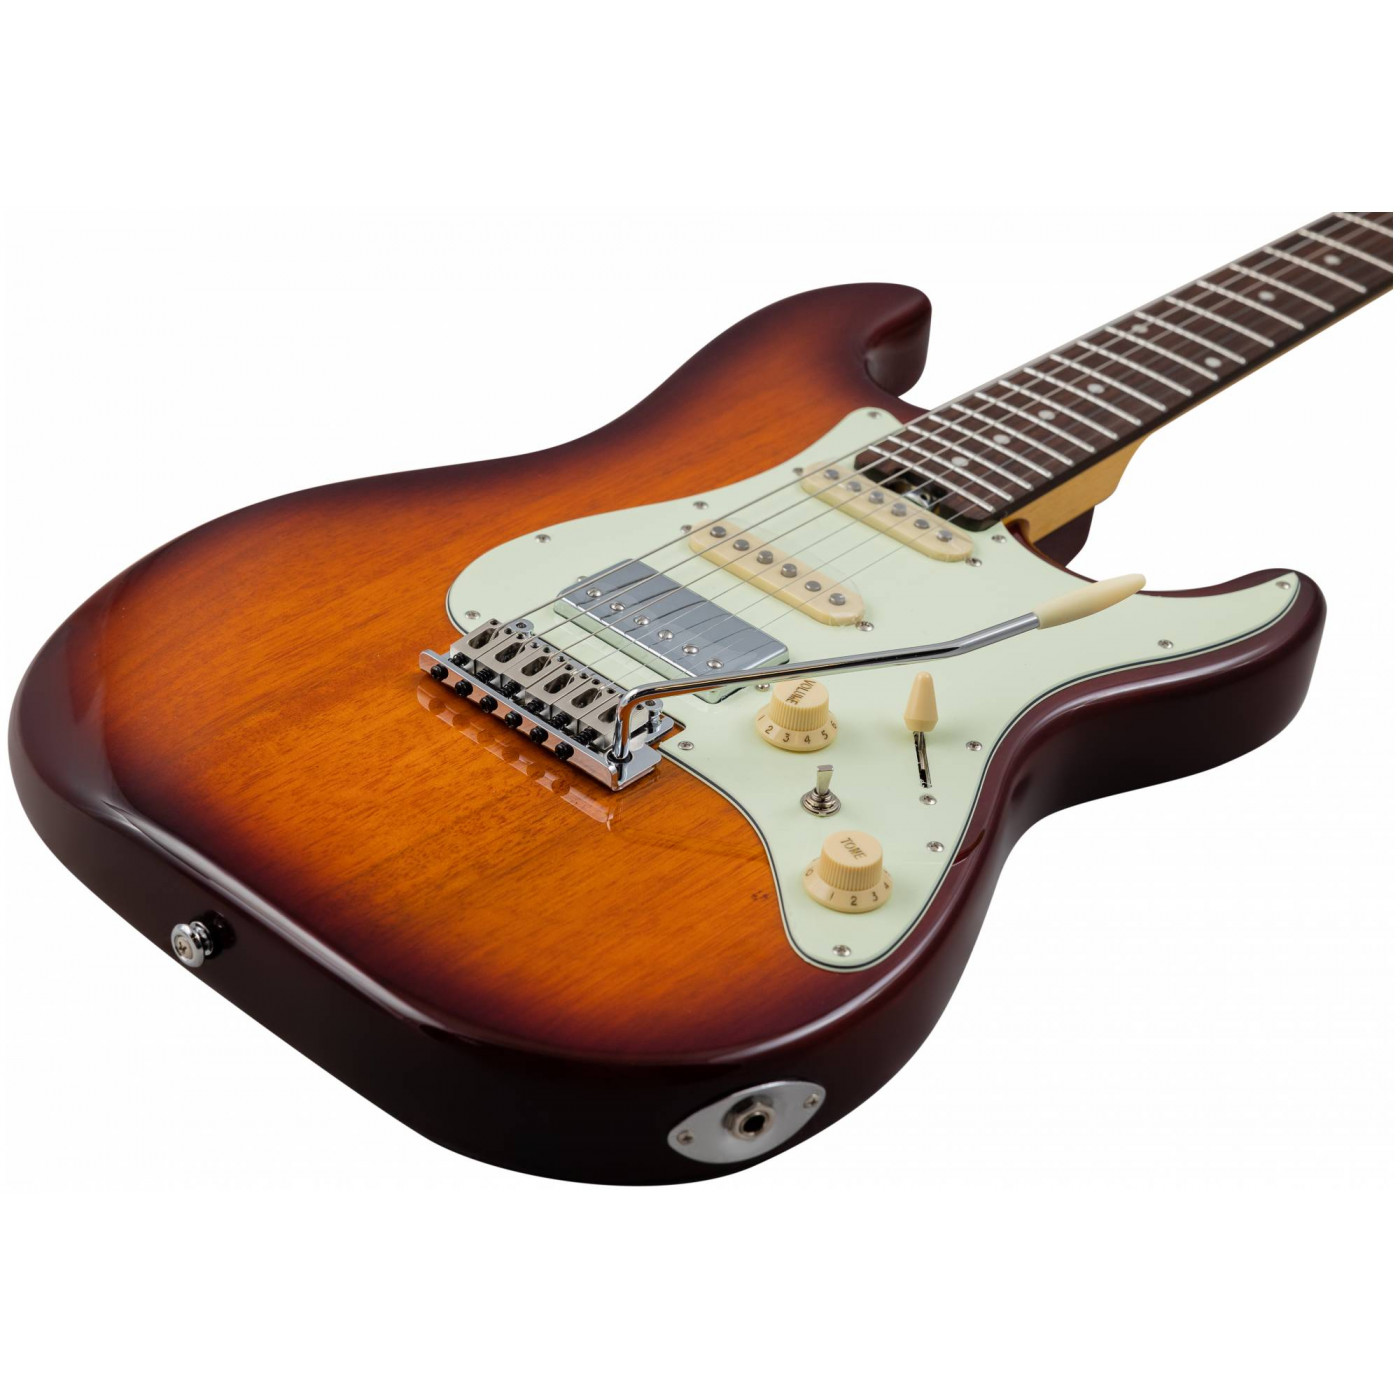 Crafter Charlotte (Silhouette) RS Tobacco Sunburst электрогитара, цвет санберст